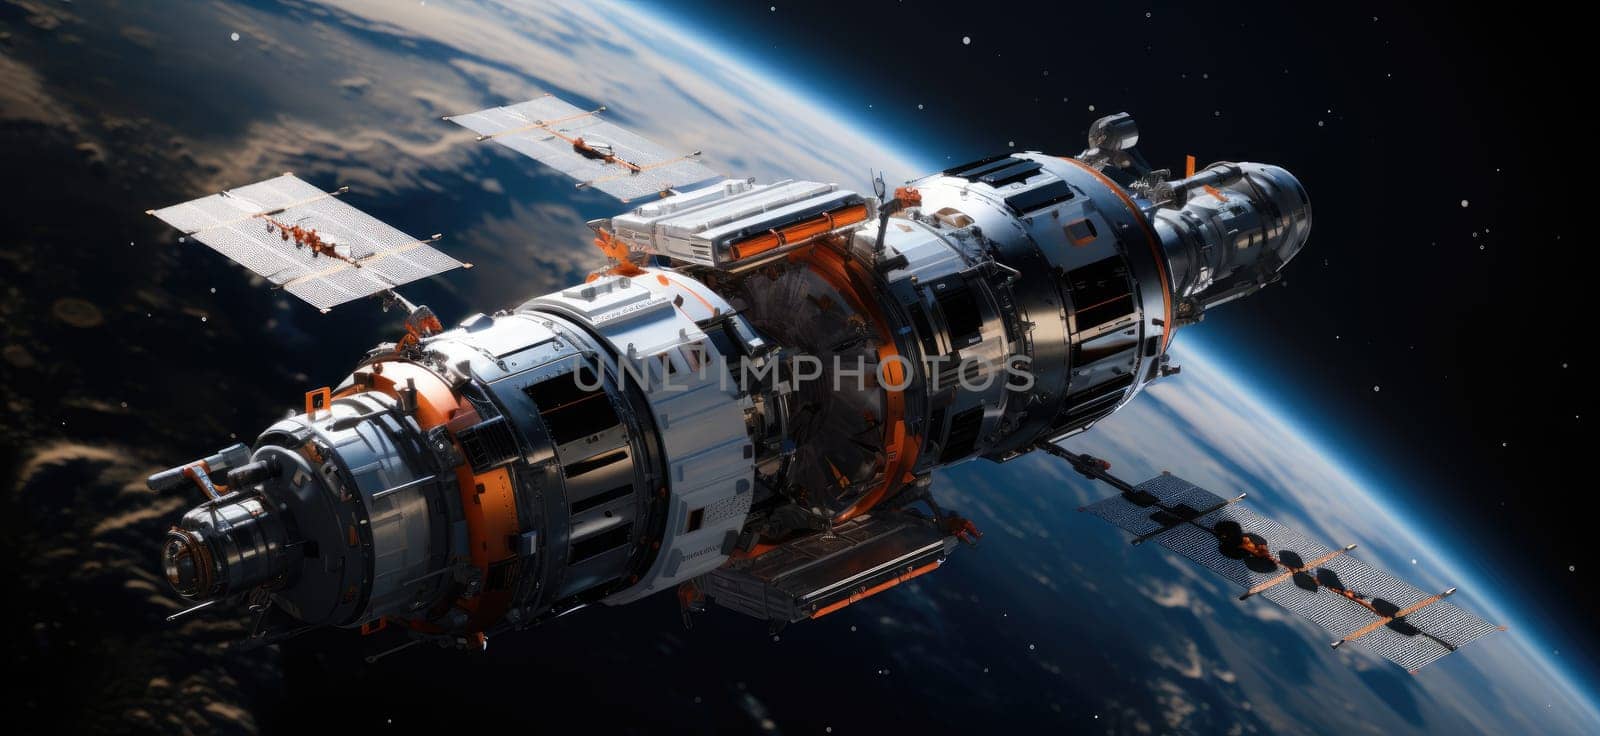 The amazing space satellite of the future combines modern style and cutting-edge technology.